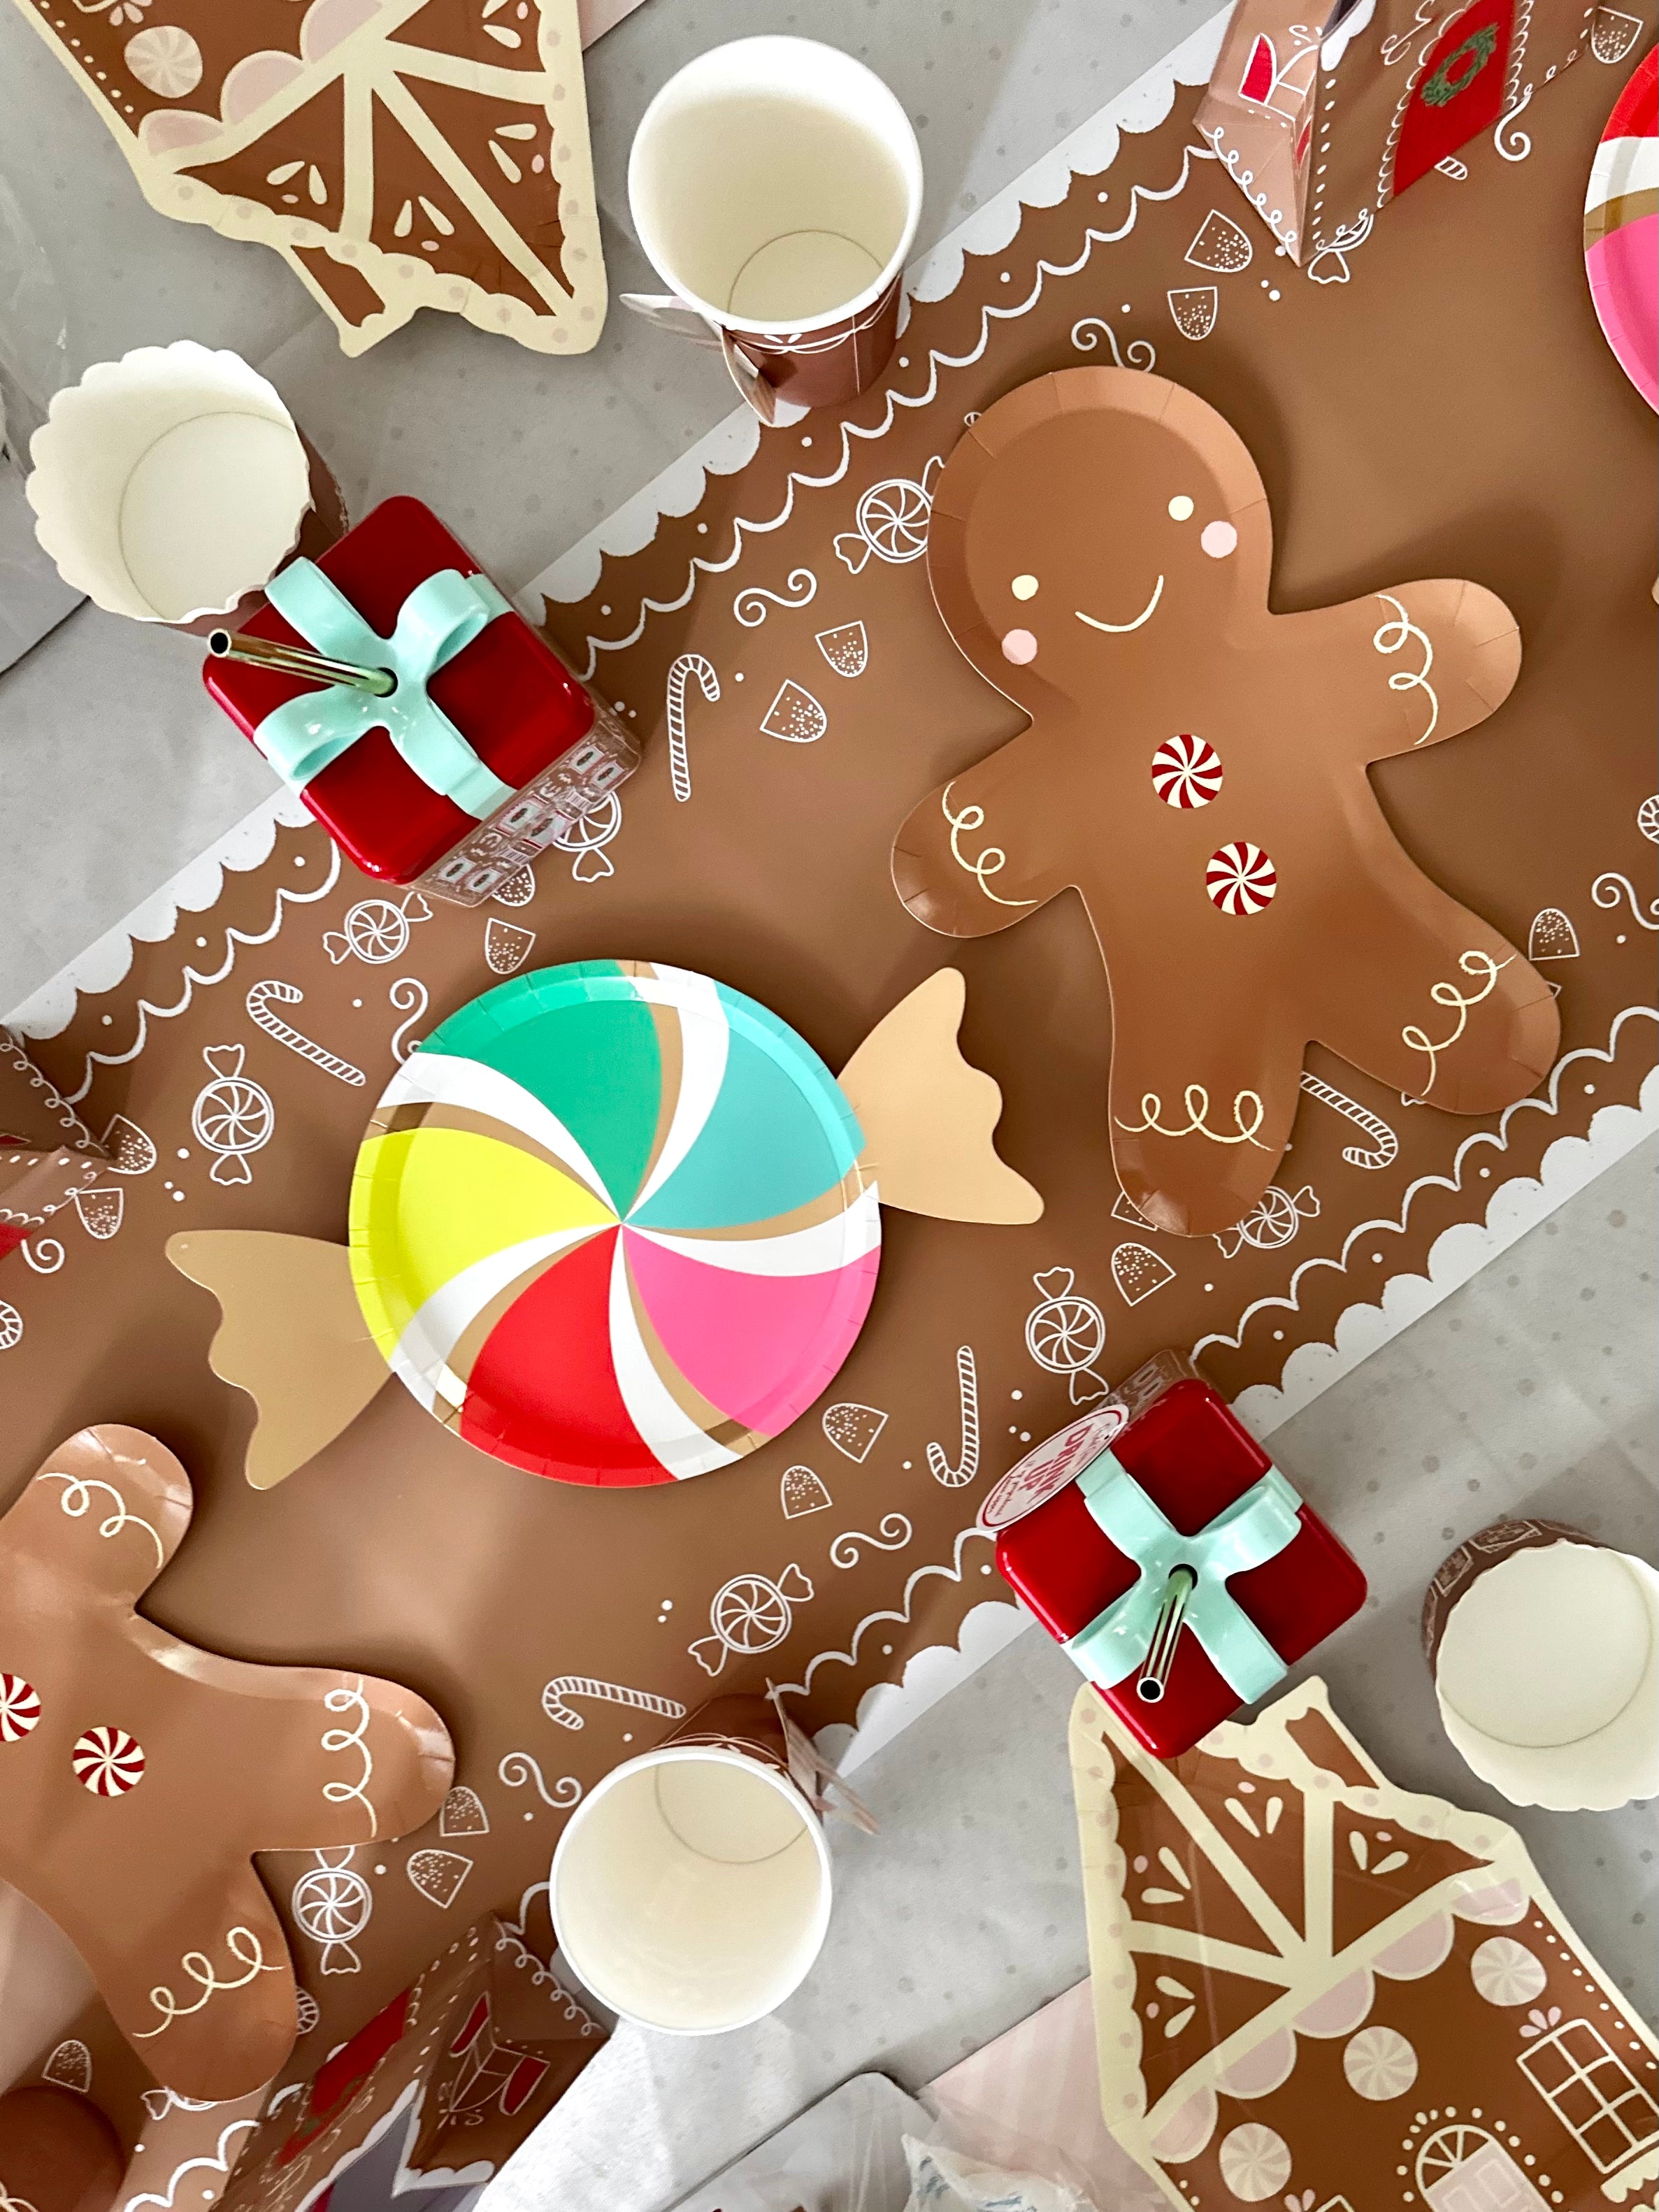 GBD1040 - GINGERBREAD MAN SHAPED PAPER PLATE